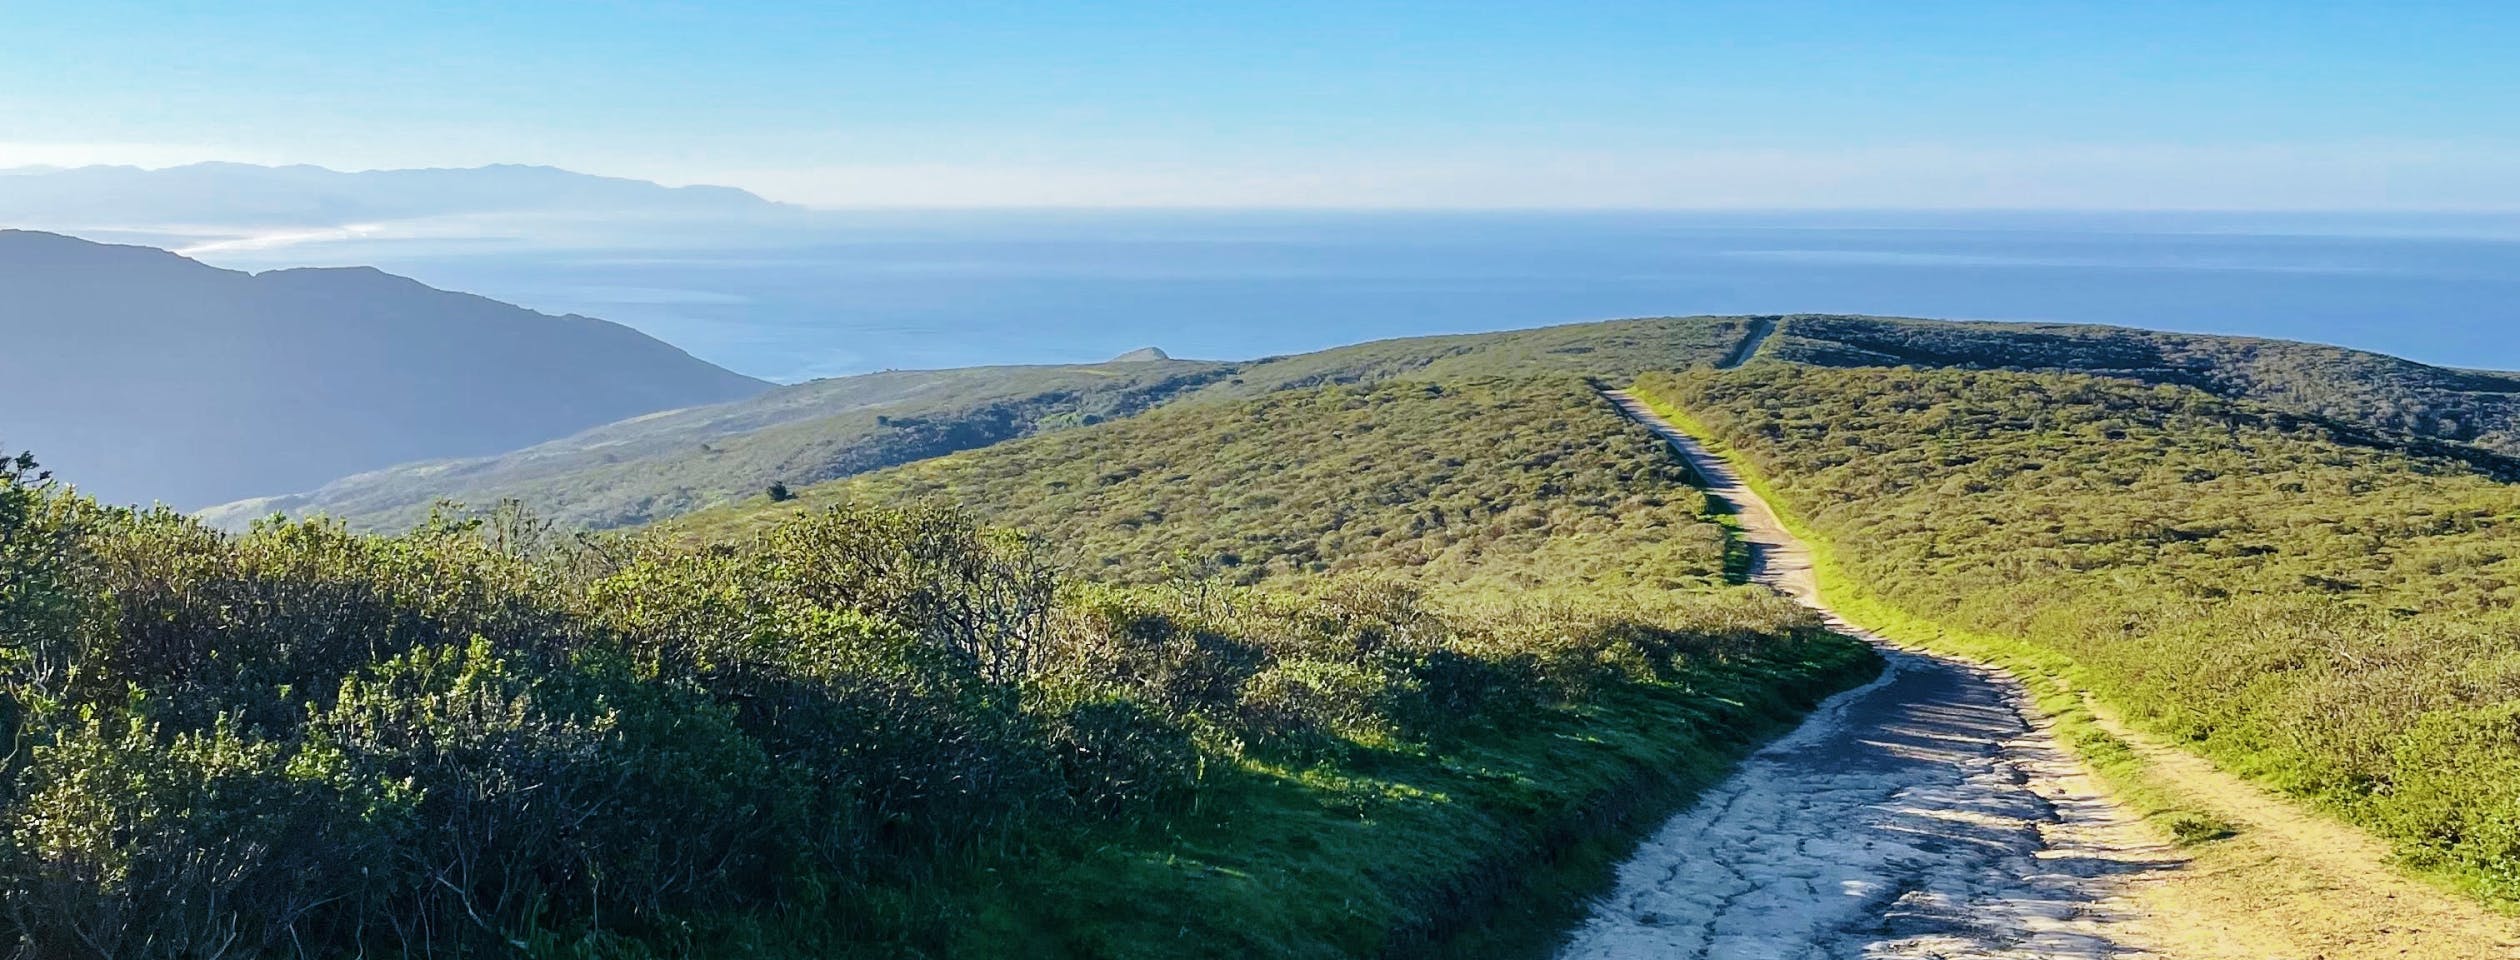 California running trail in the hills with the ocean in the background.